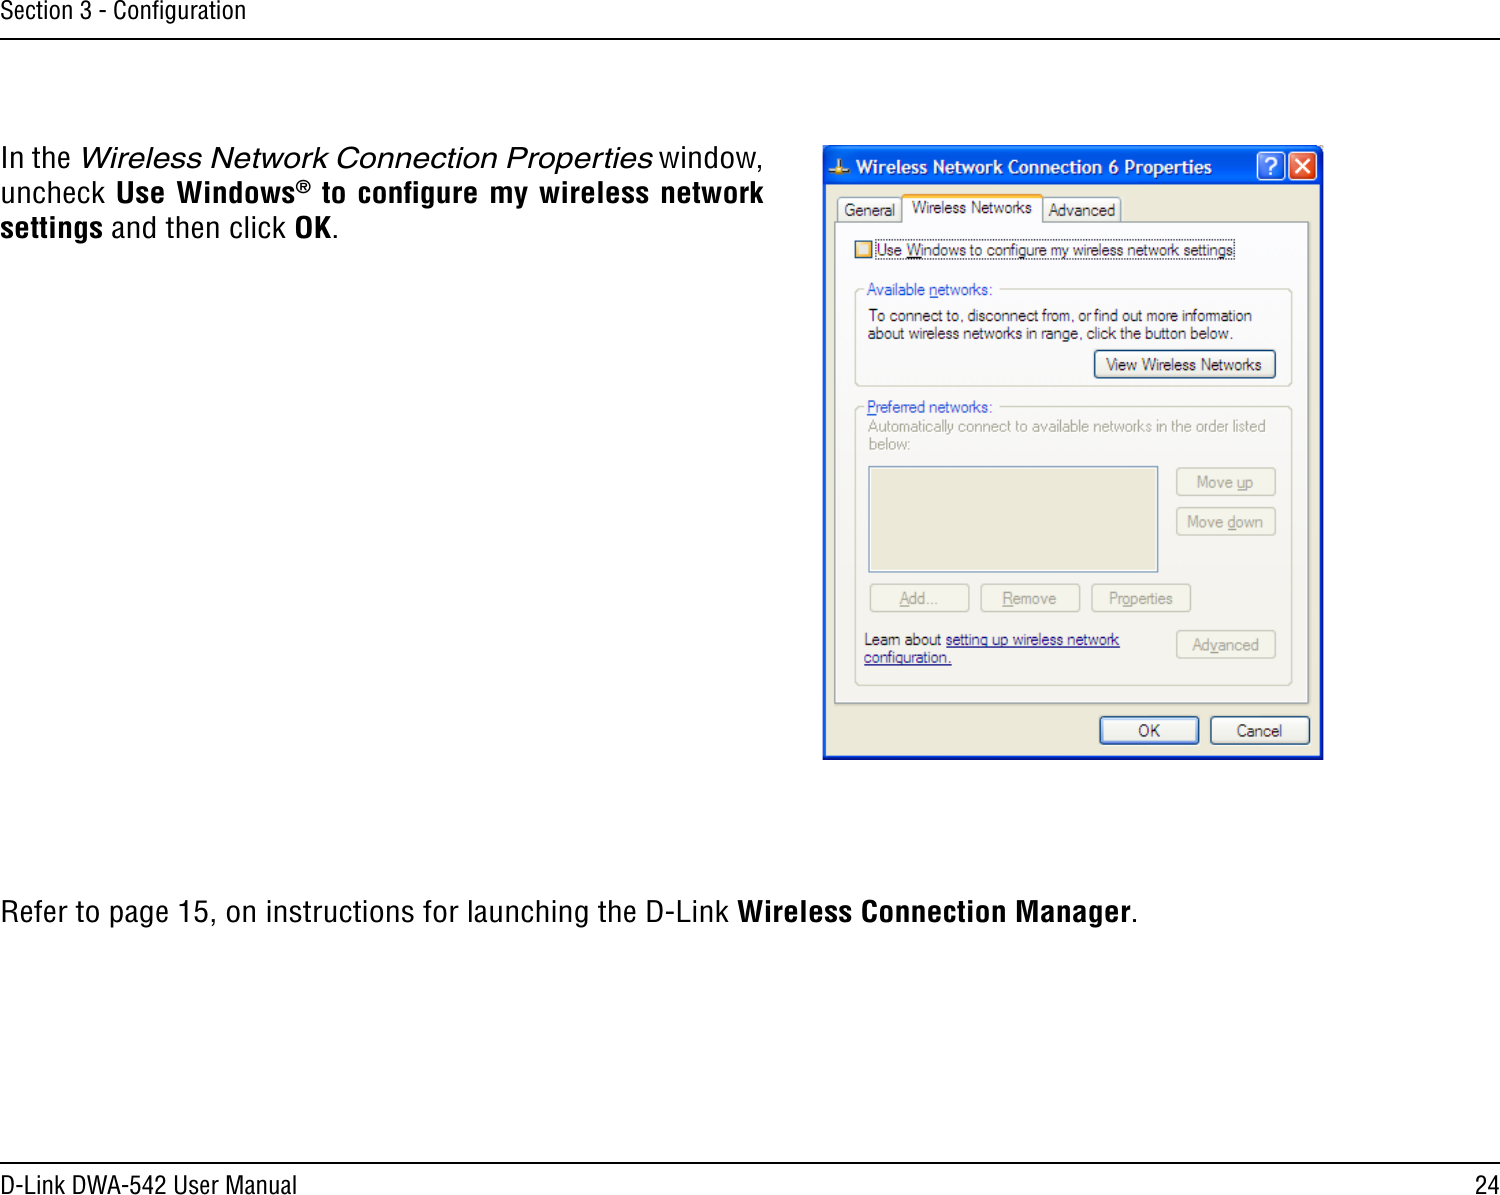 24D-Link DWA-542 User ManualSection 3 - ConﬁgurationIn the Wireless Network Connection Properties window, uncheck Use Windows® to conﬁgure my wireless network settings and then click OK.Refer to page 15, on instructions for launching the D-Link Wireless Connection Manager. 